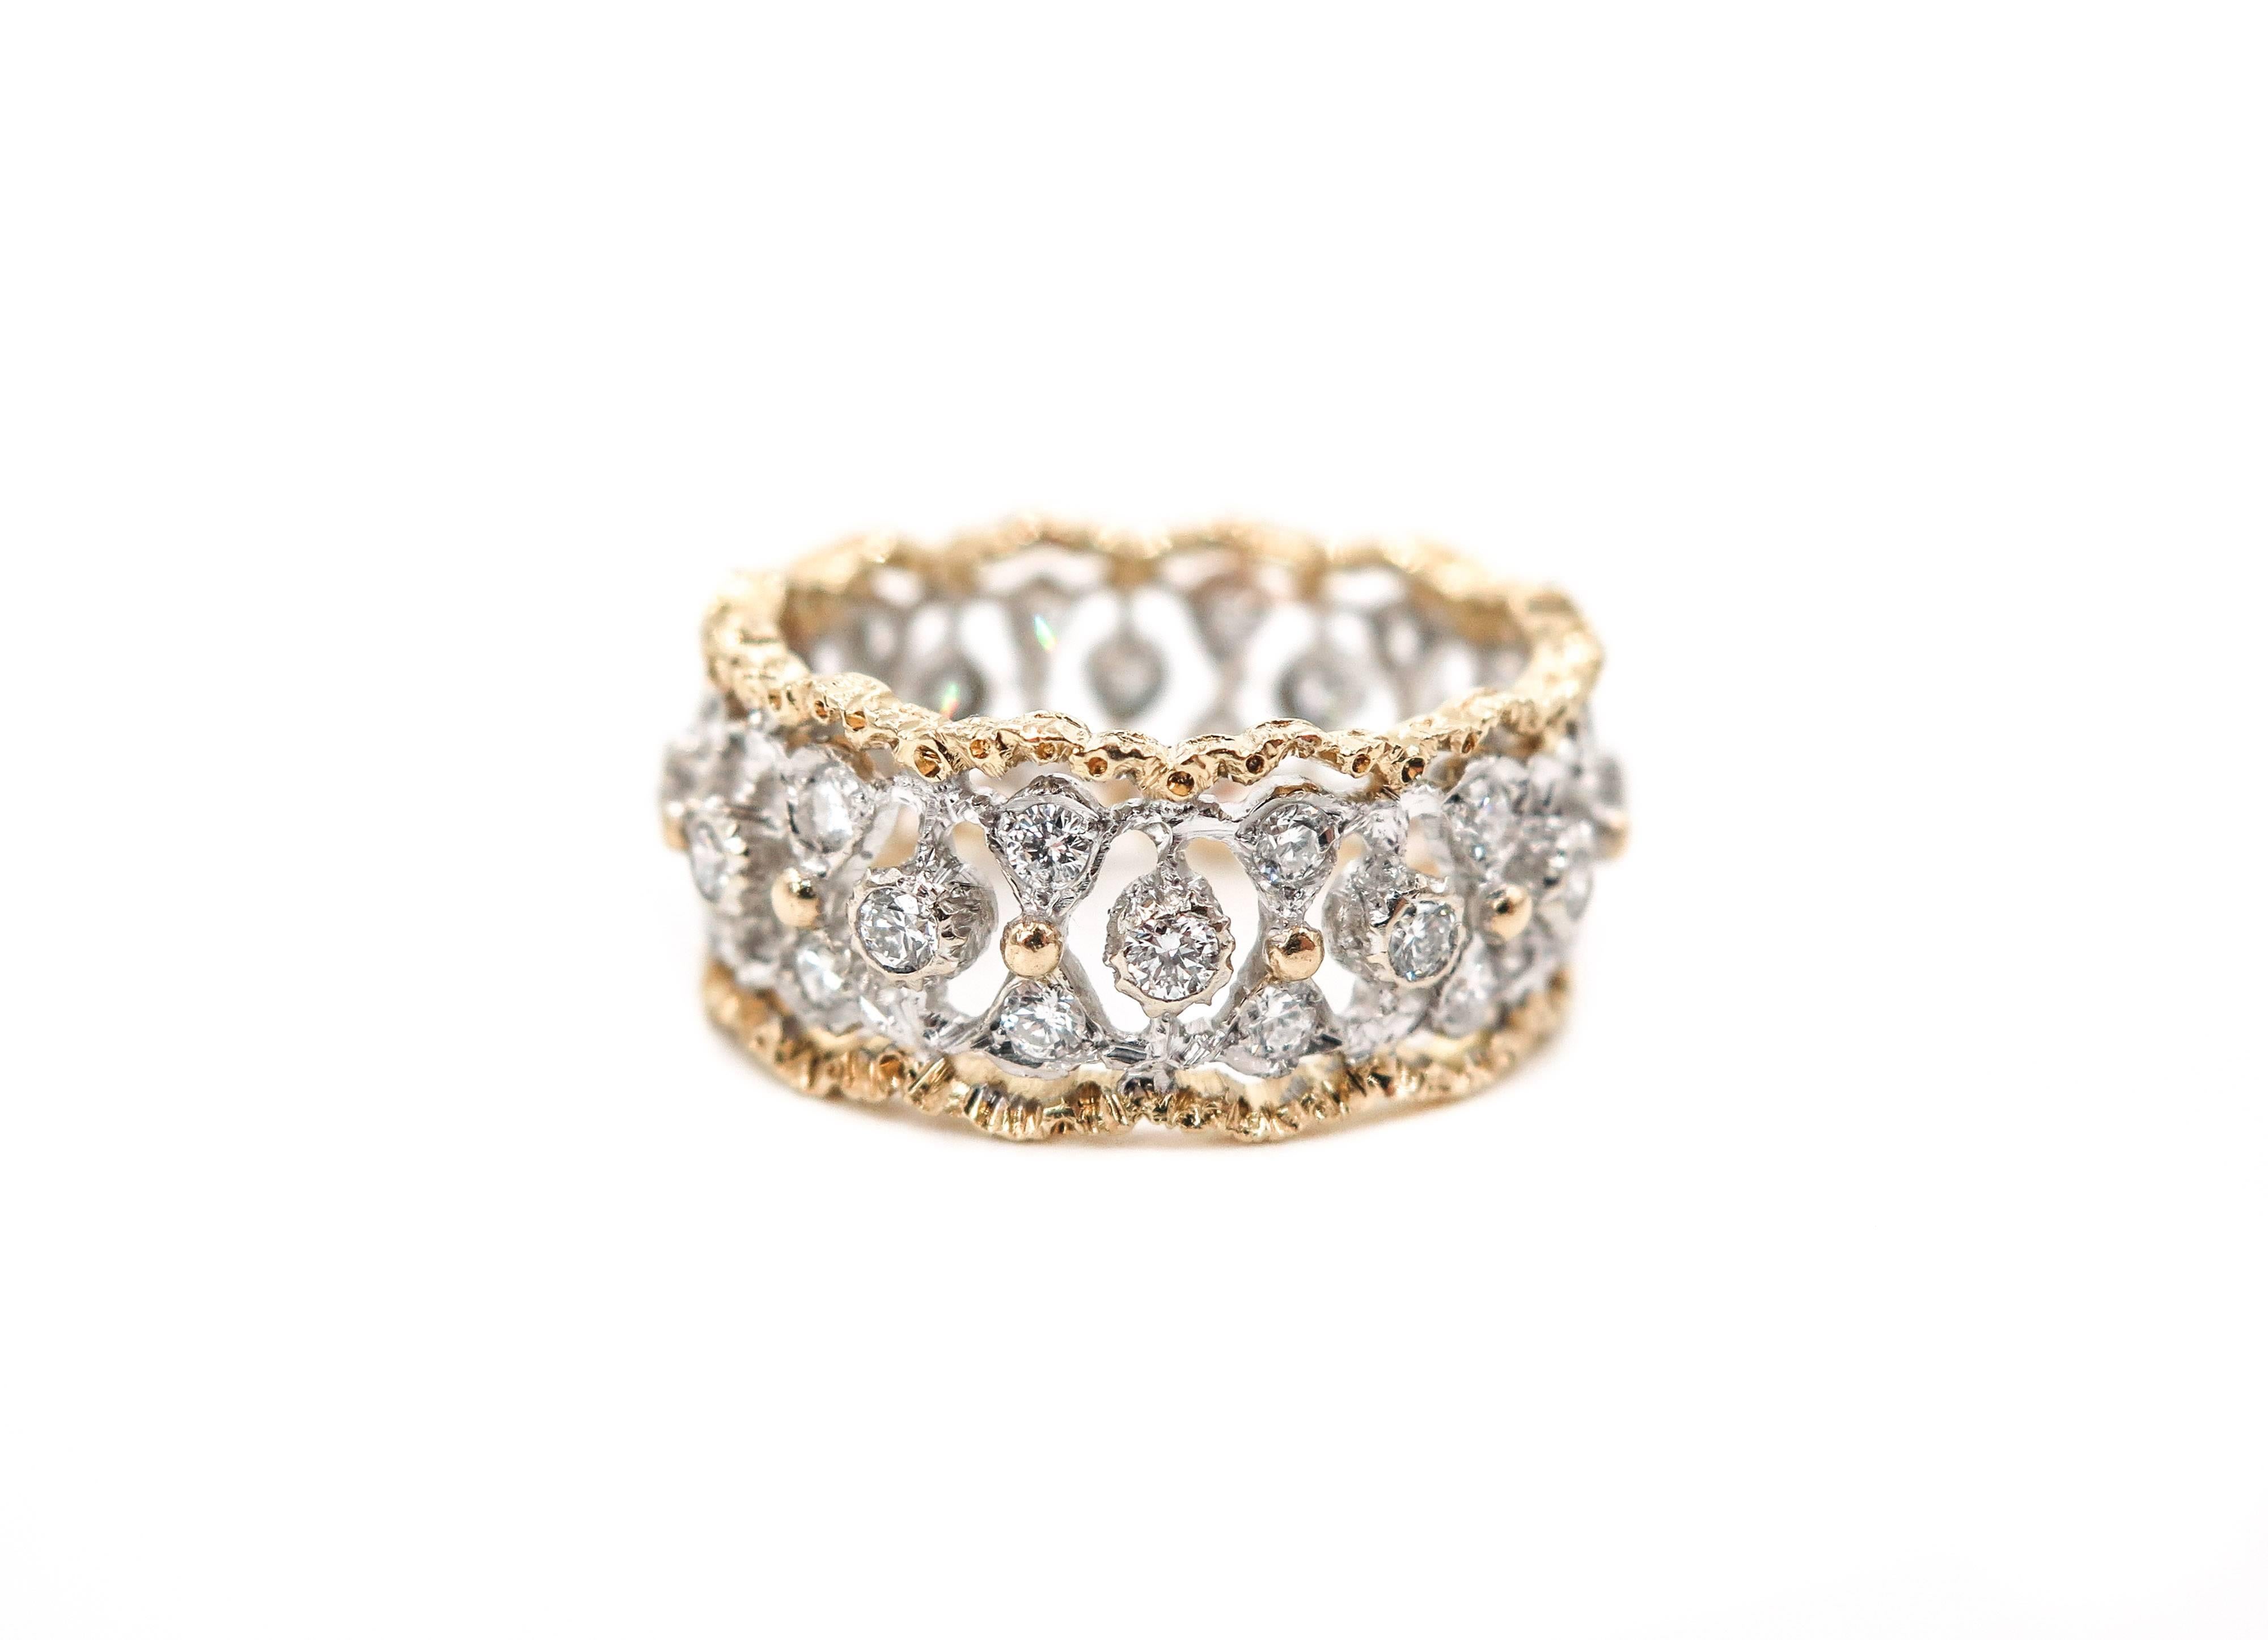 Eternelle ring, an exquisite design by Buccelatti. Handcrafted in 18k white gold set with diamonds and scalloped yellow gold borders.
Finger size 7